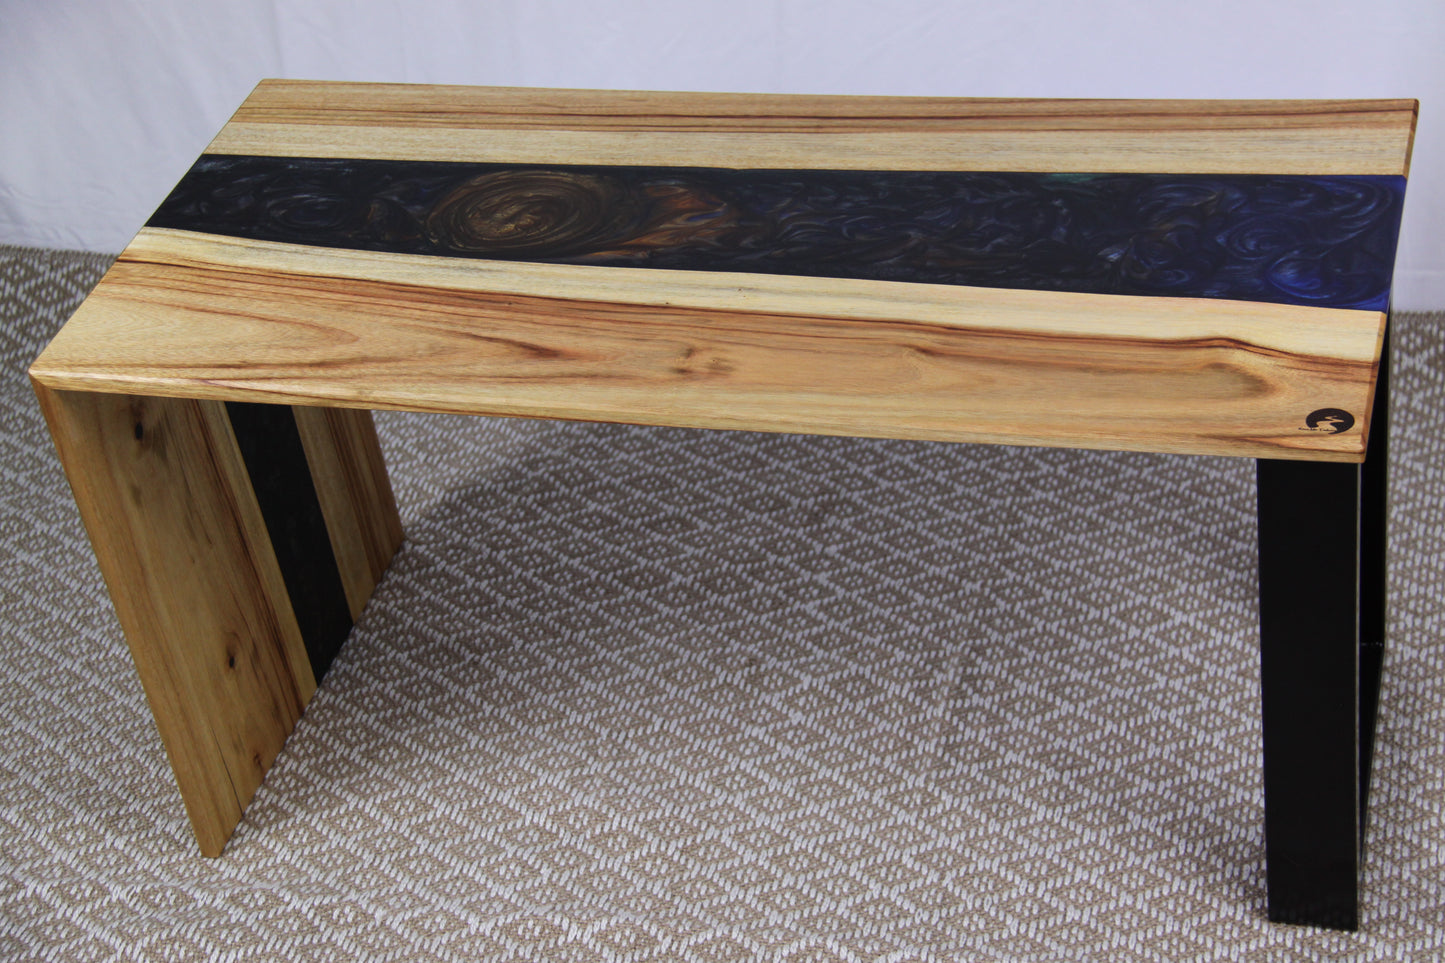 Coffee Table with Waterfall Look